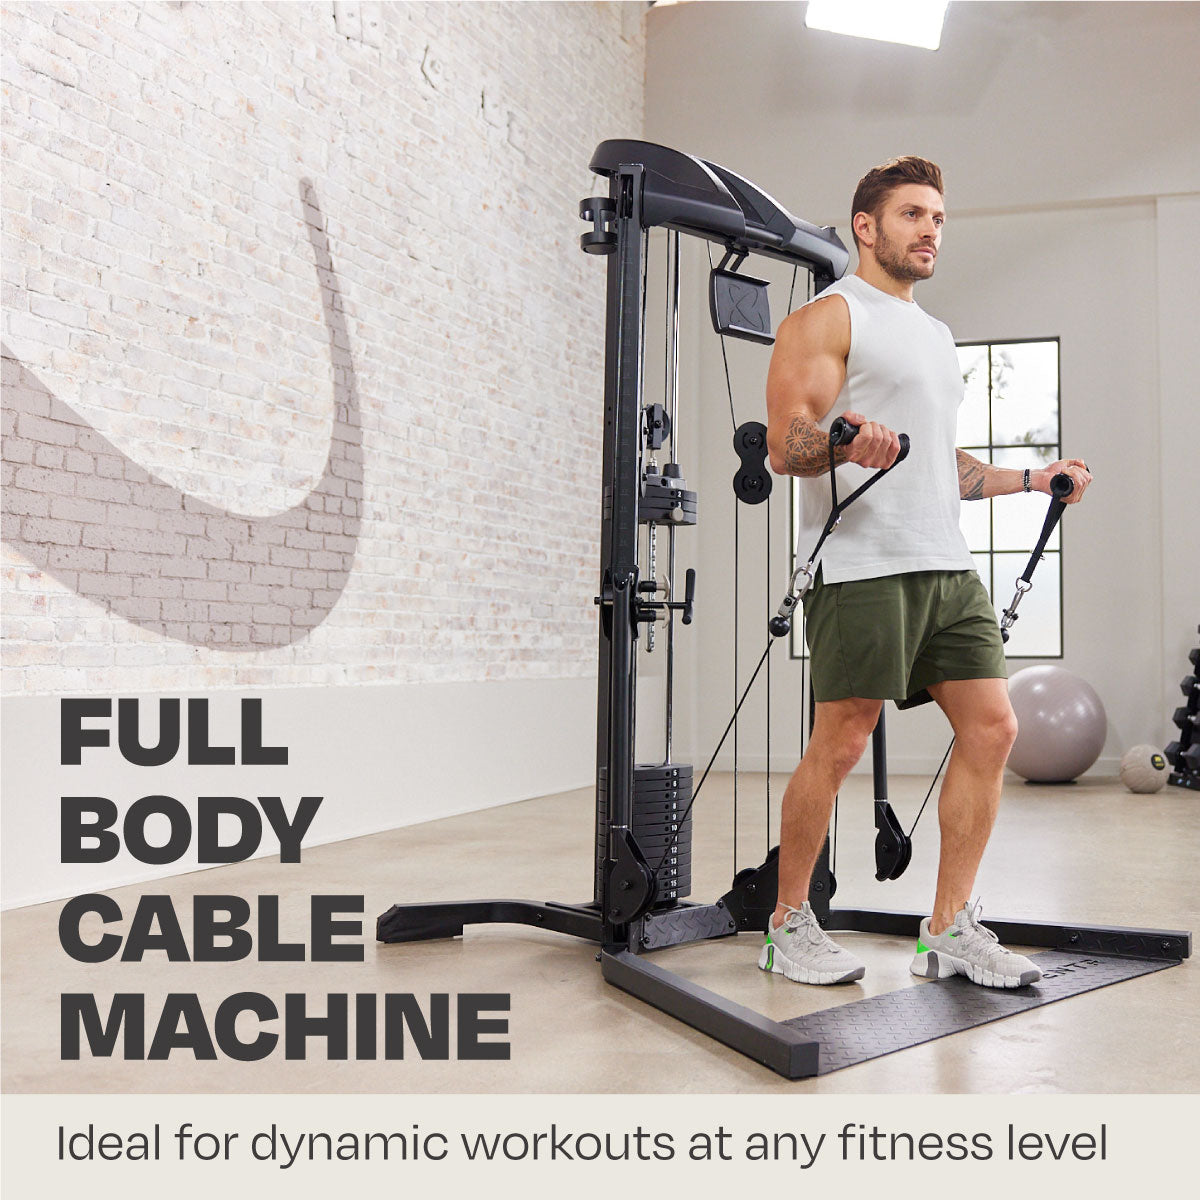 Centr 1 Home Gym Functional Trainer With Folding Workout Bench and 12-month  Centr Membership